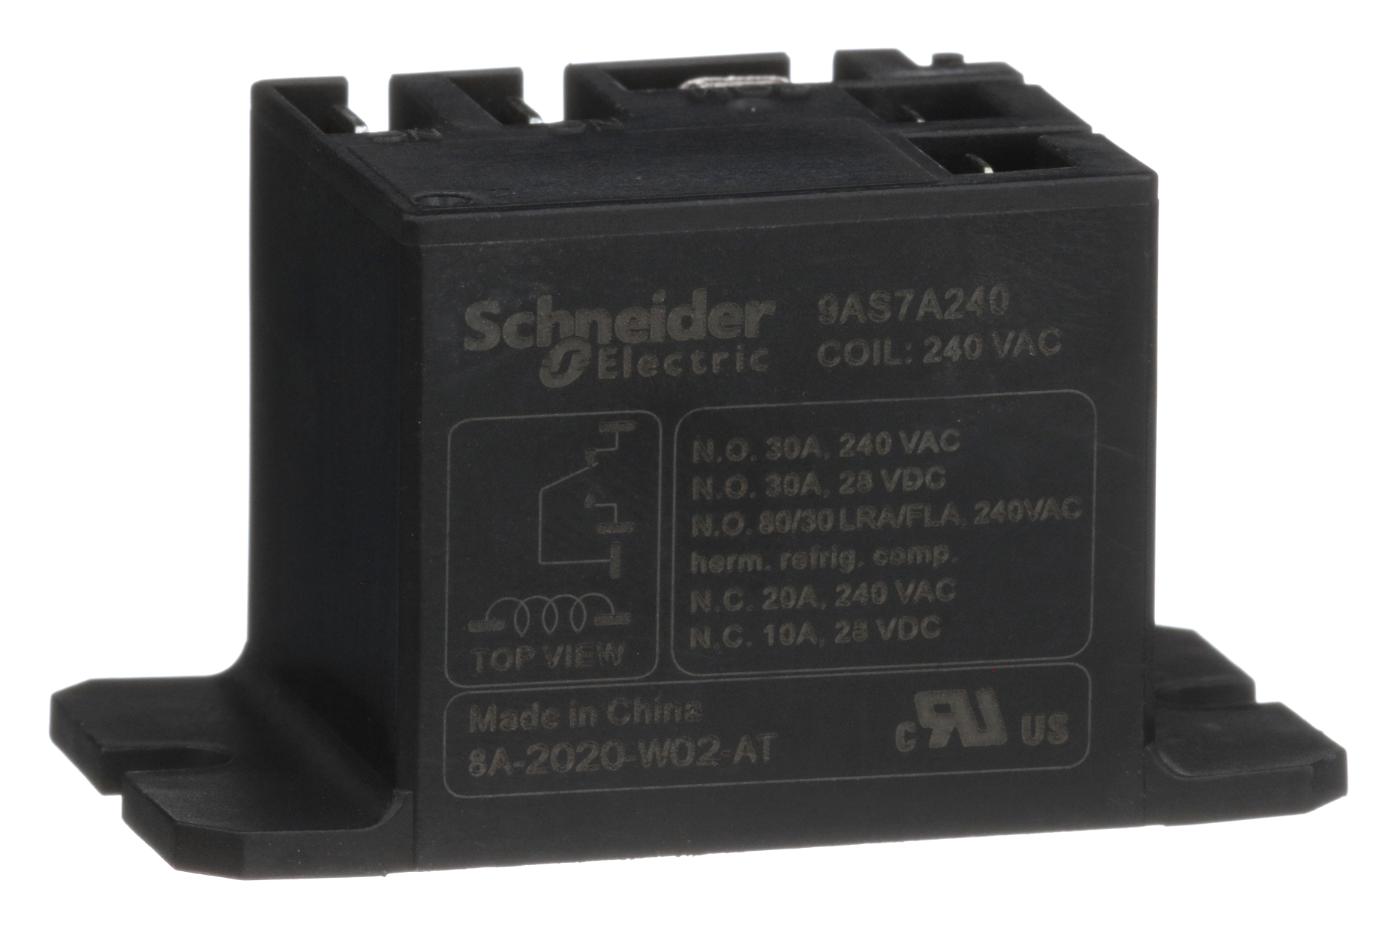 Schneider Electric/legacy Relay 9As7A240 Power Relay, Spdt, 240Vac, 30A, Panel